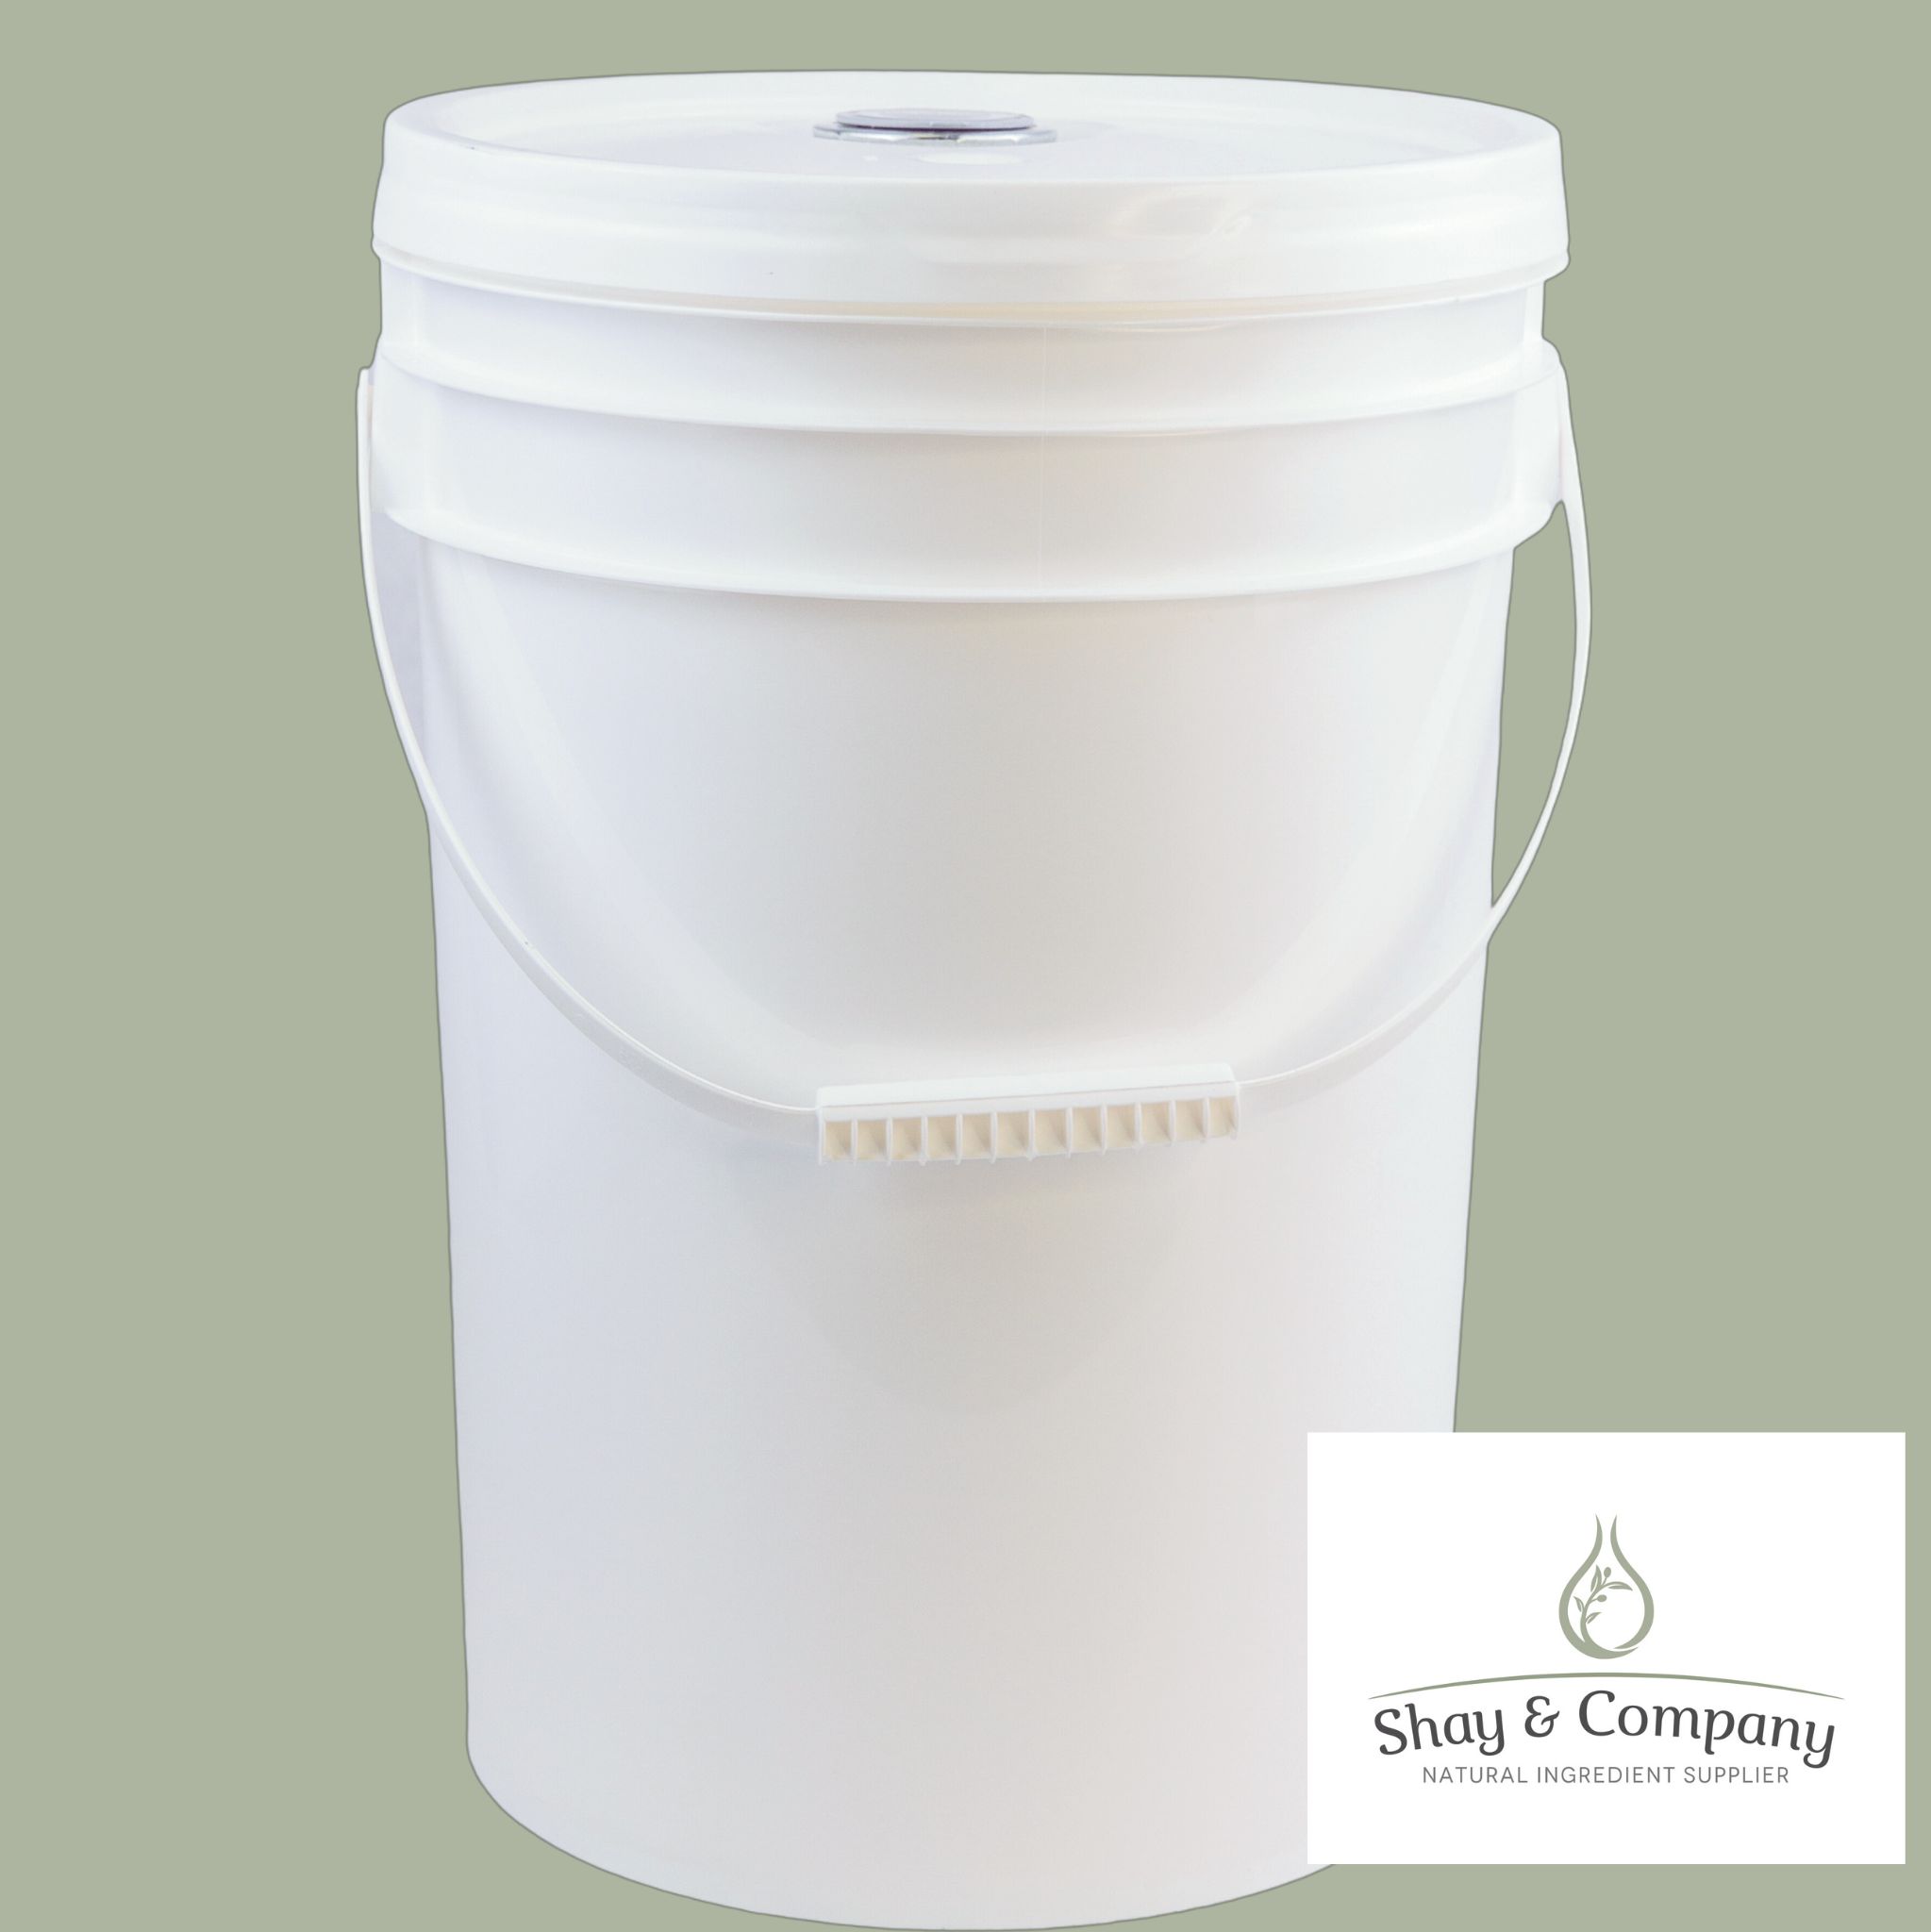 5 GALLON BUCKET WITH POUR SPOUT IN LID